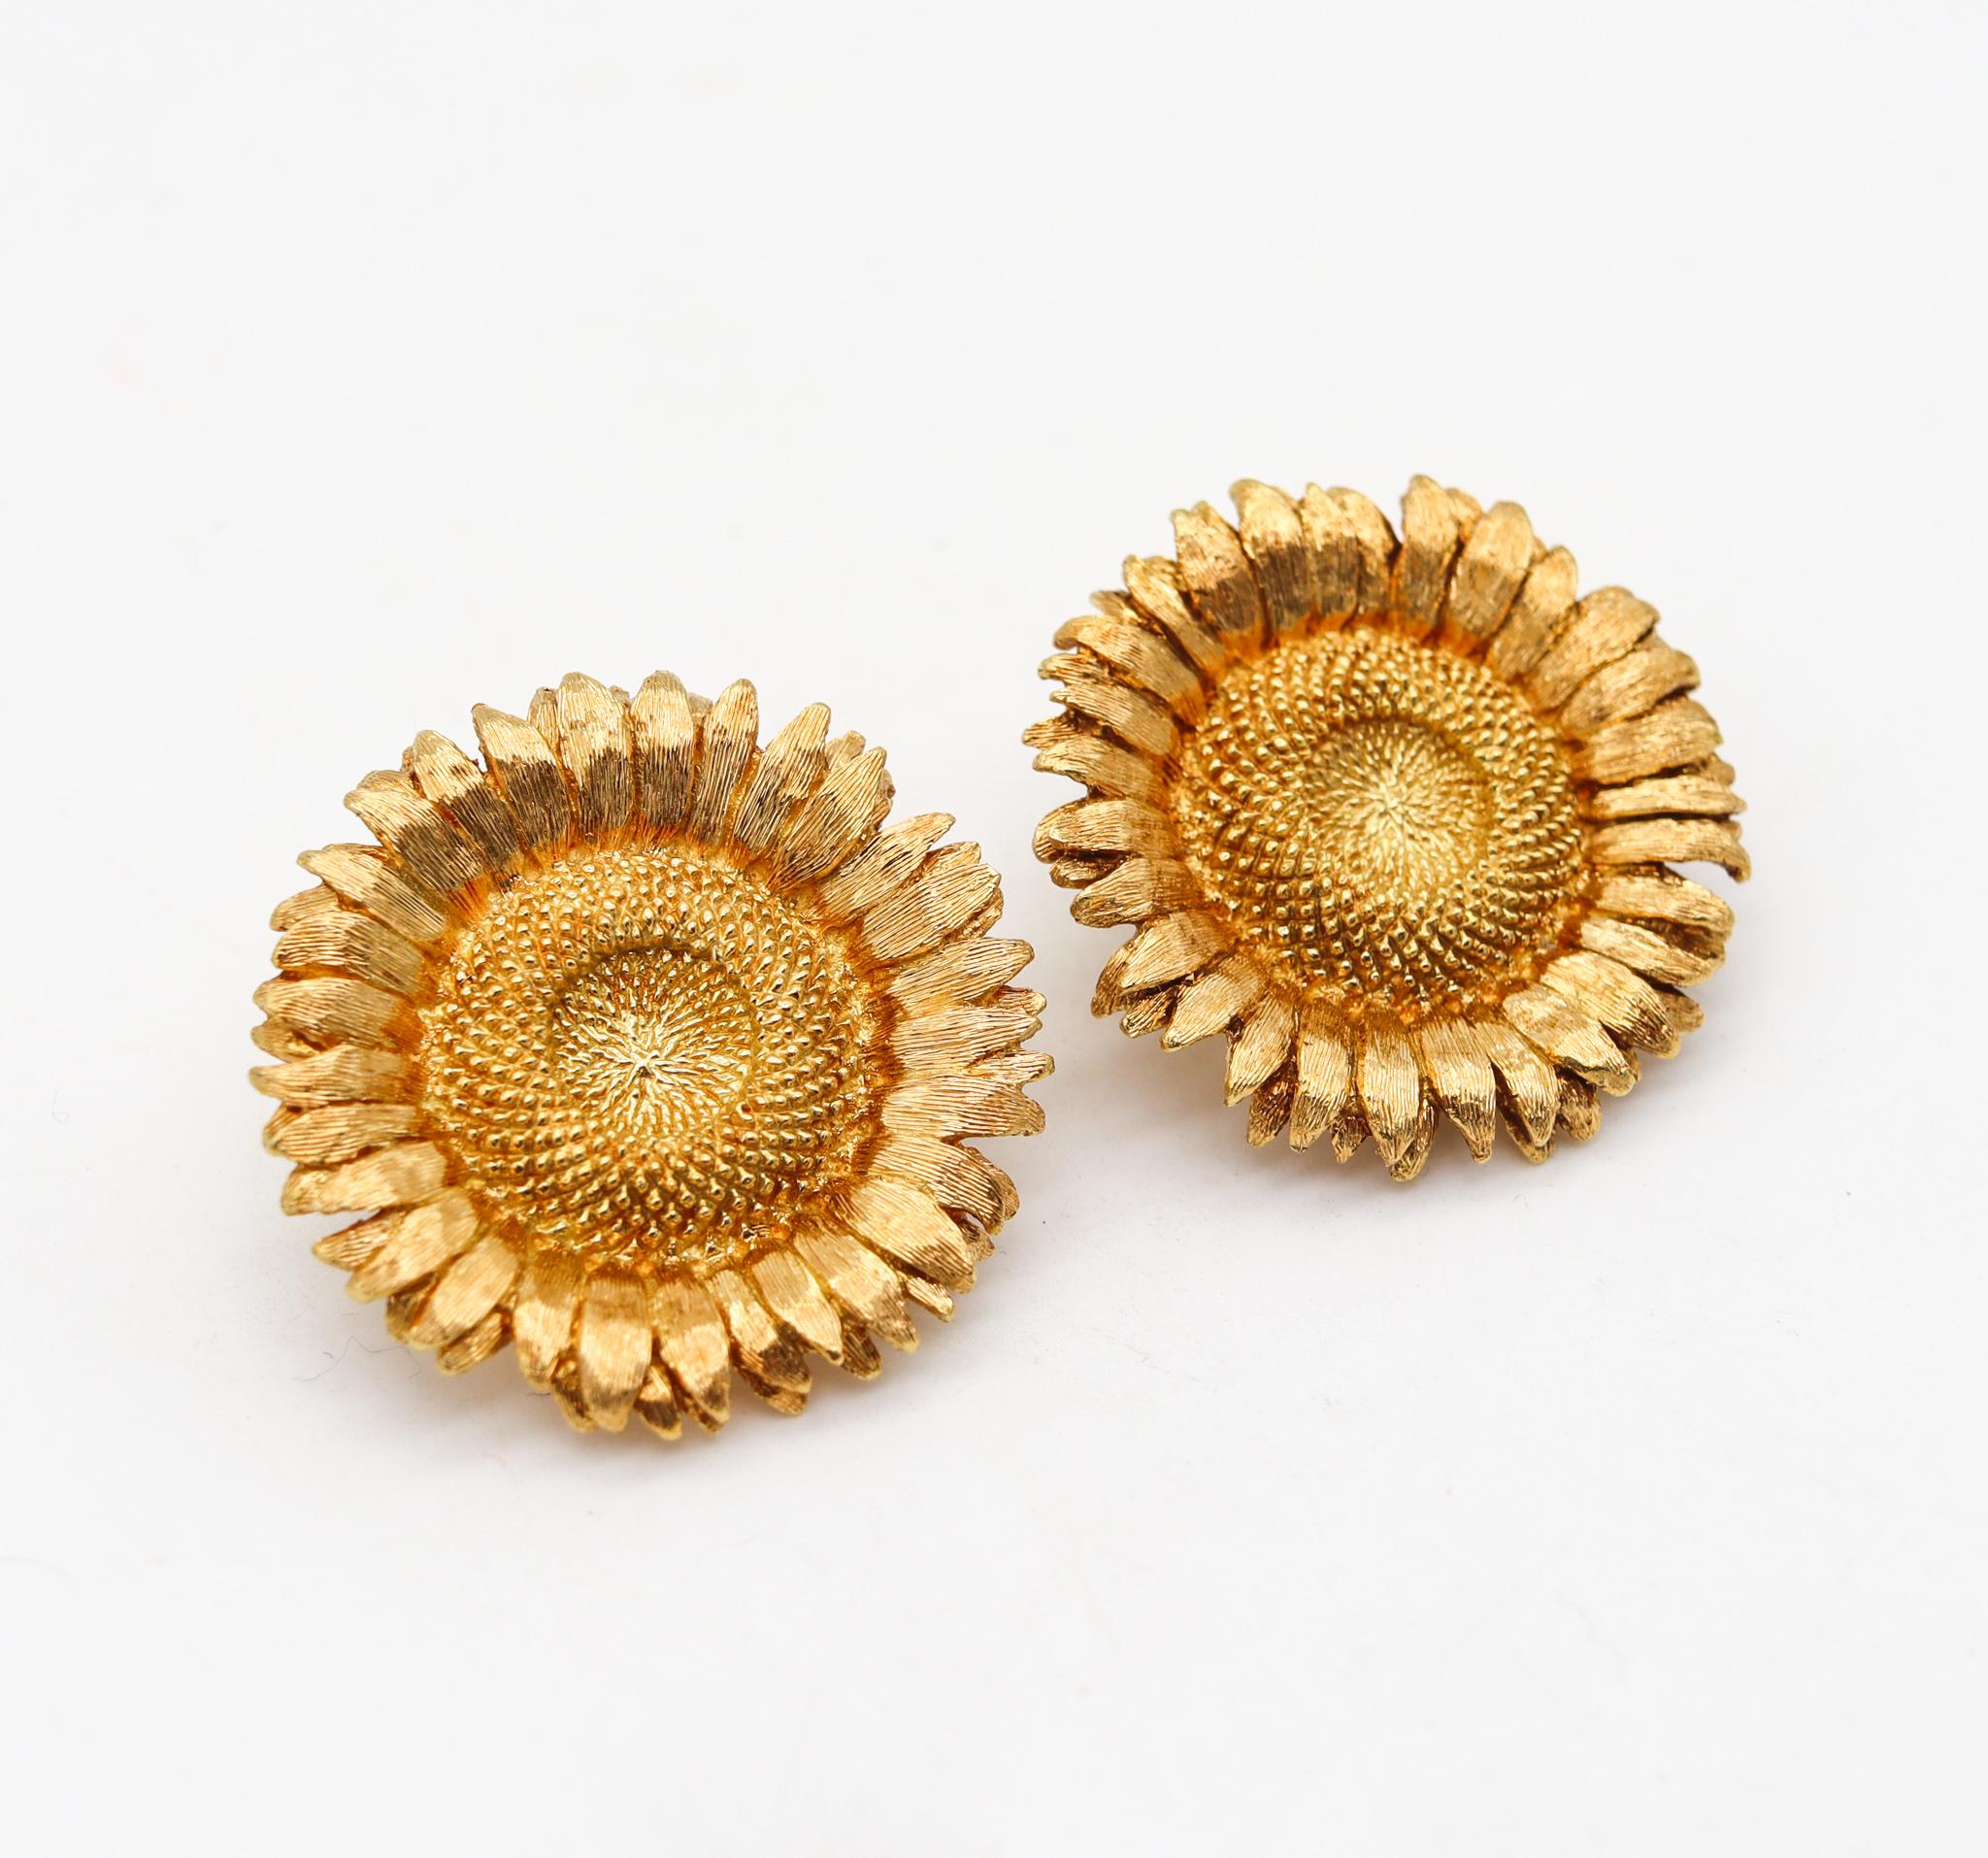 Sunflowers clips-earrings designed by Robert Bruce Bielka.

Wonderful refreshing tropical pieces, created by Robert Bruce Bielka back in the late 20th century. These pair of earrings was carefully crafted in the shape of large sunflowers with great